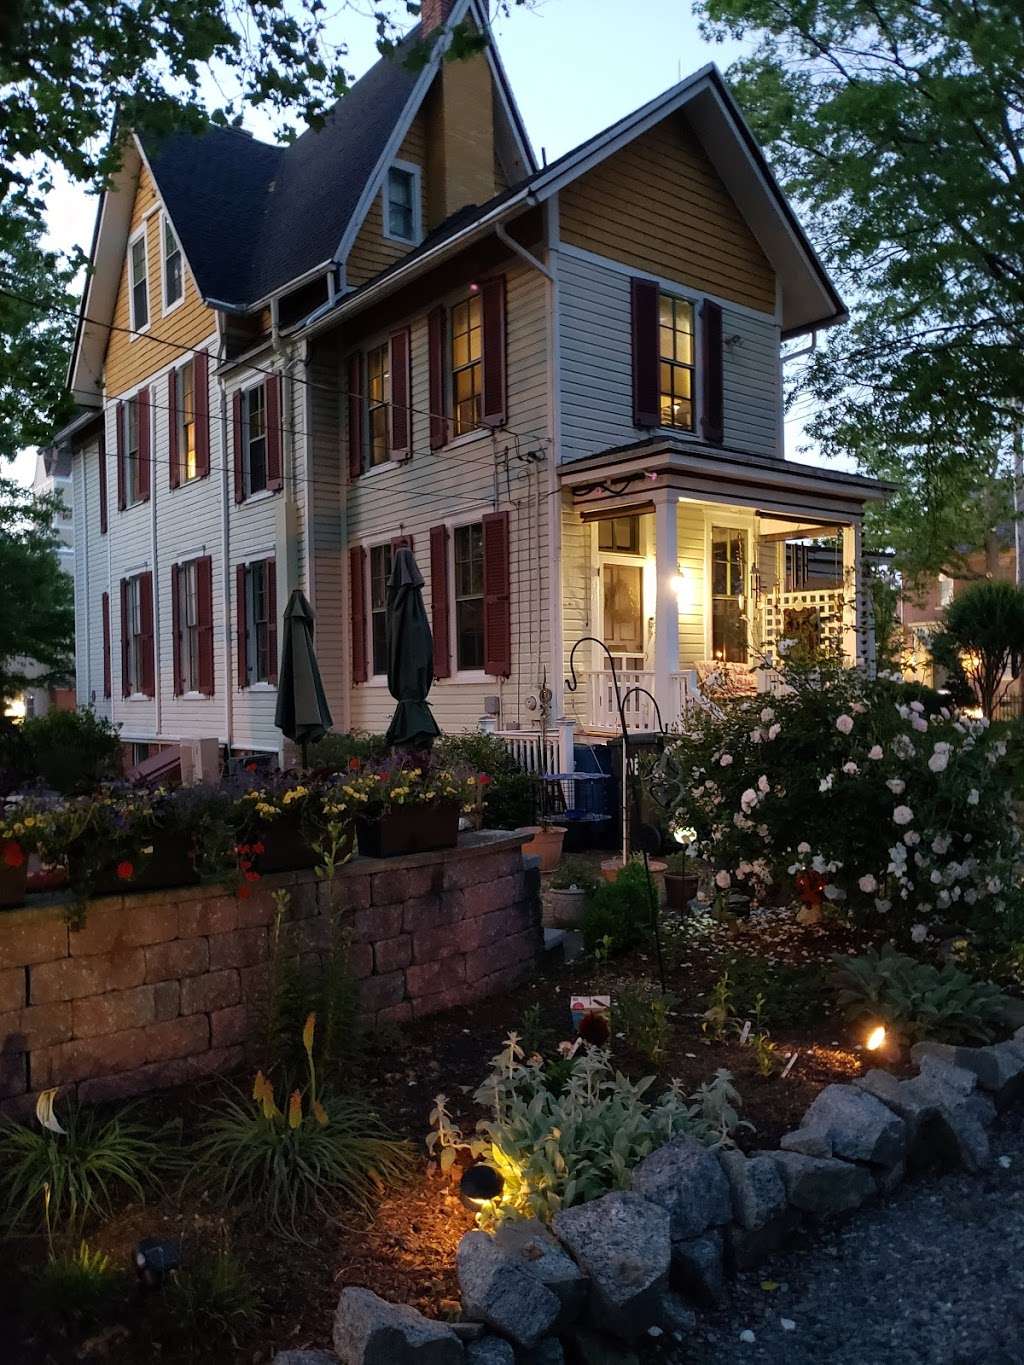 Bishops House Bed and Breakfast | 214 Goldsborough St, Easton, MD 21601 | Phone: (410) 820-7290